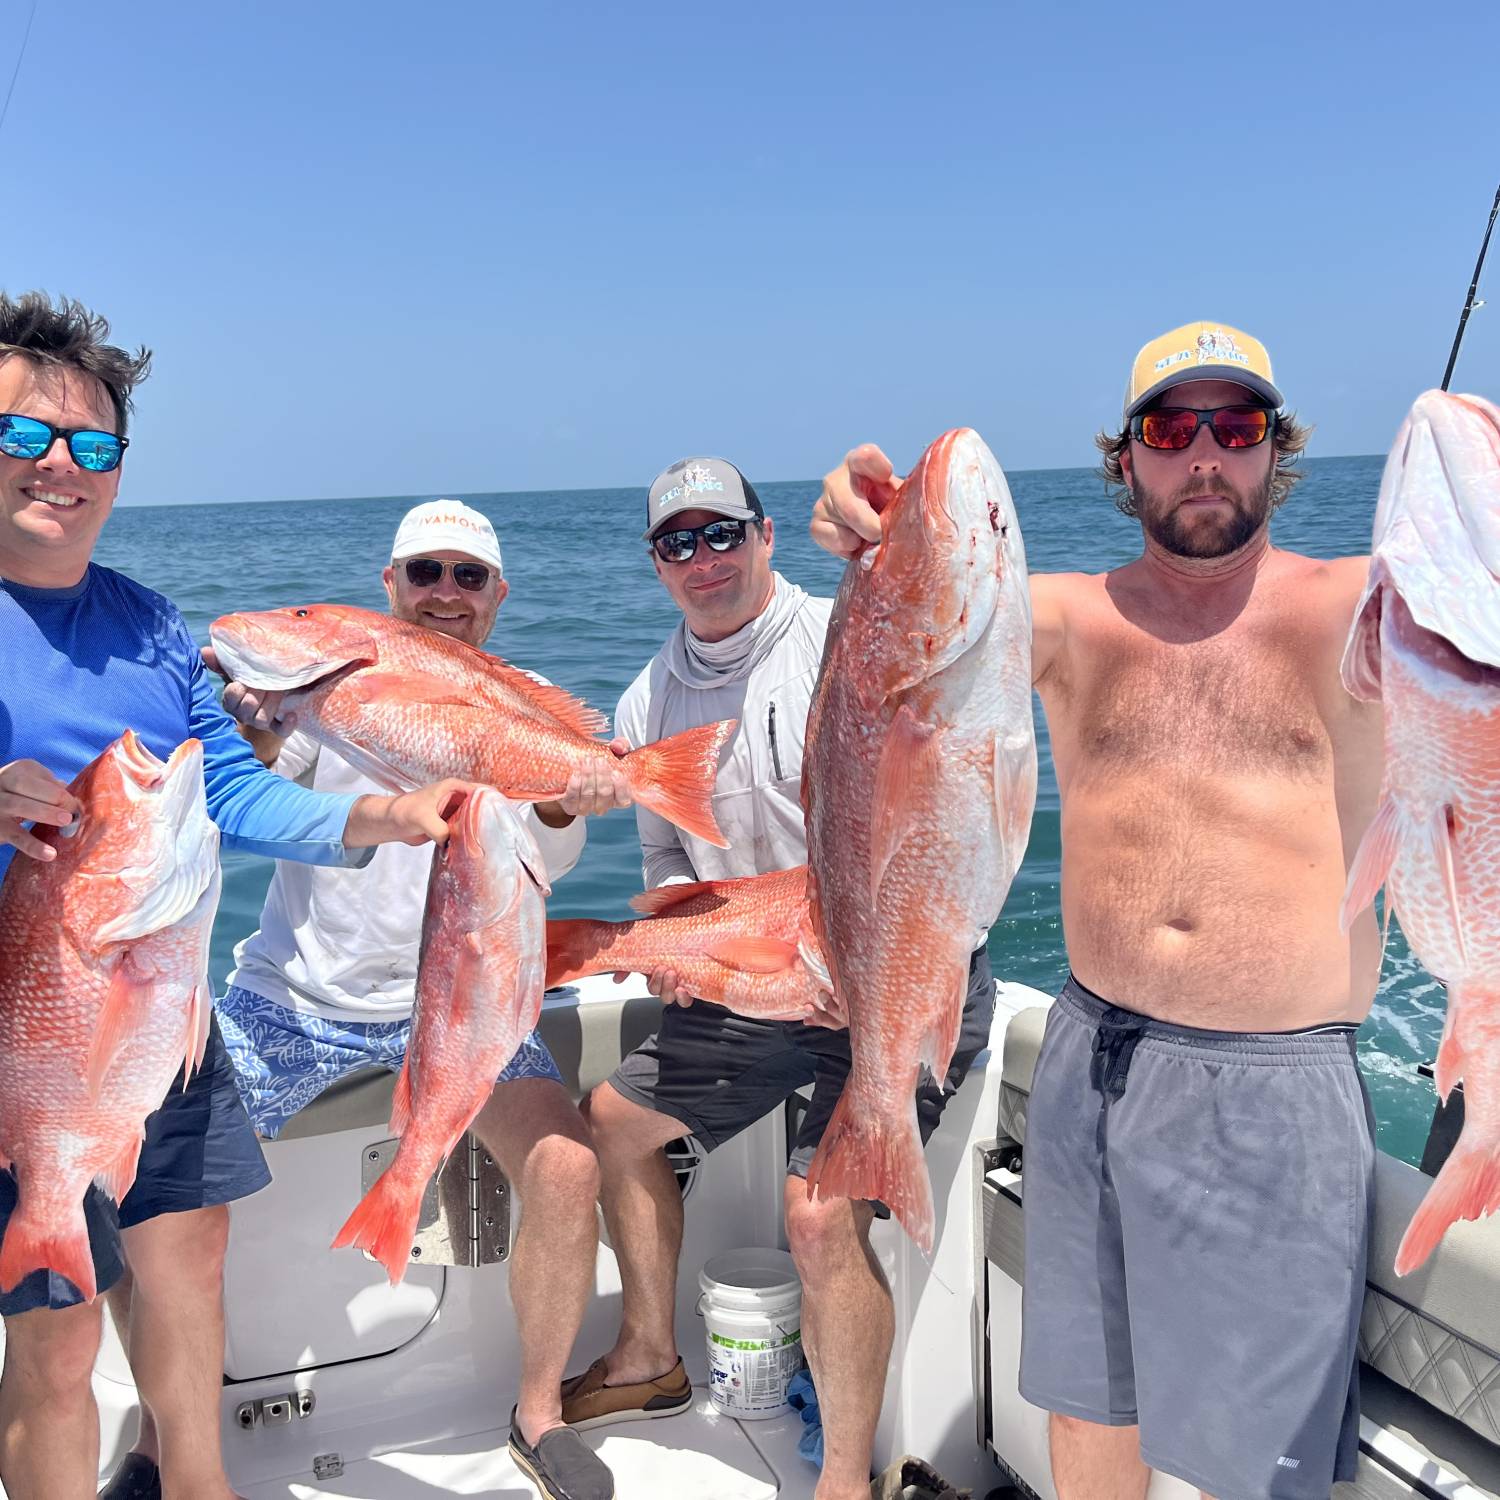 Title: Snapper time - On board their Sportsman Open 322 Center Console - Location: Gulf of Mexico off the Texas coast. Participating in the Photo Contest #SportsmanAugust2023